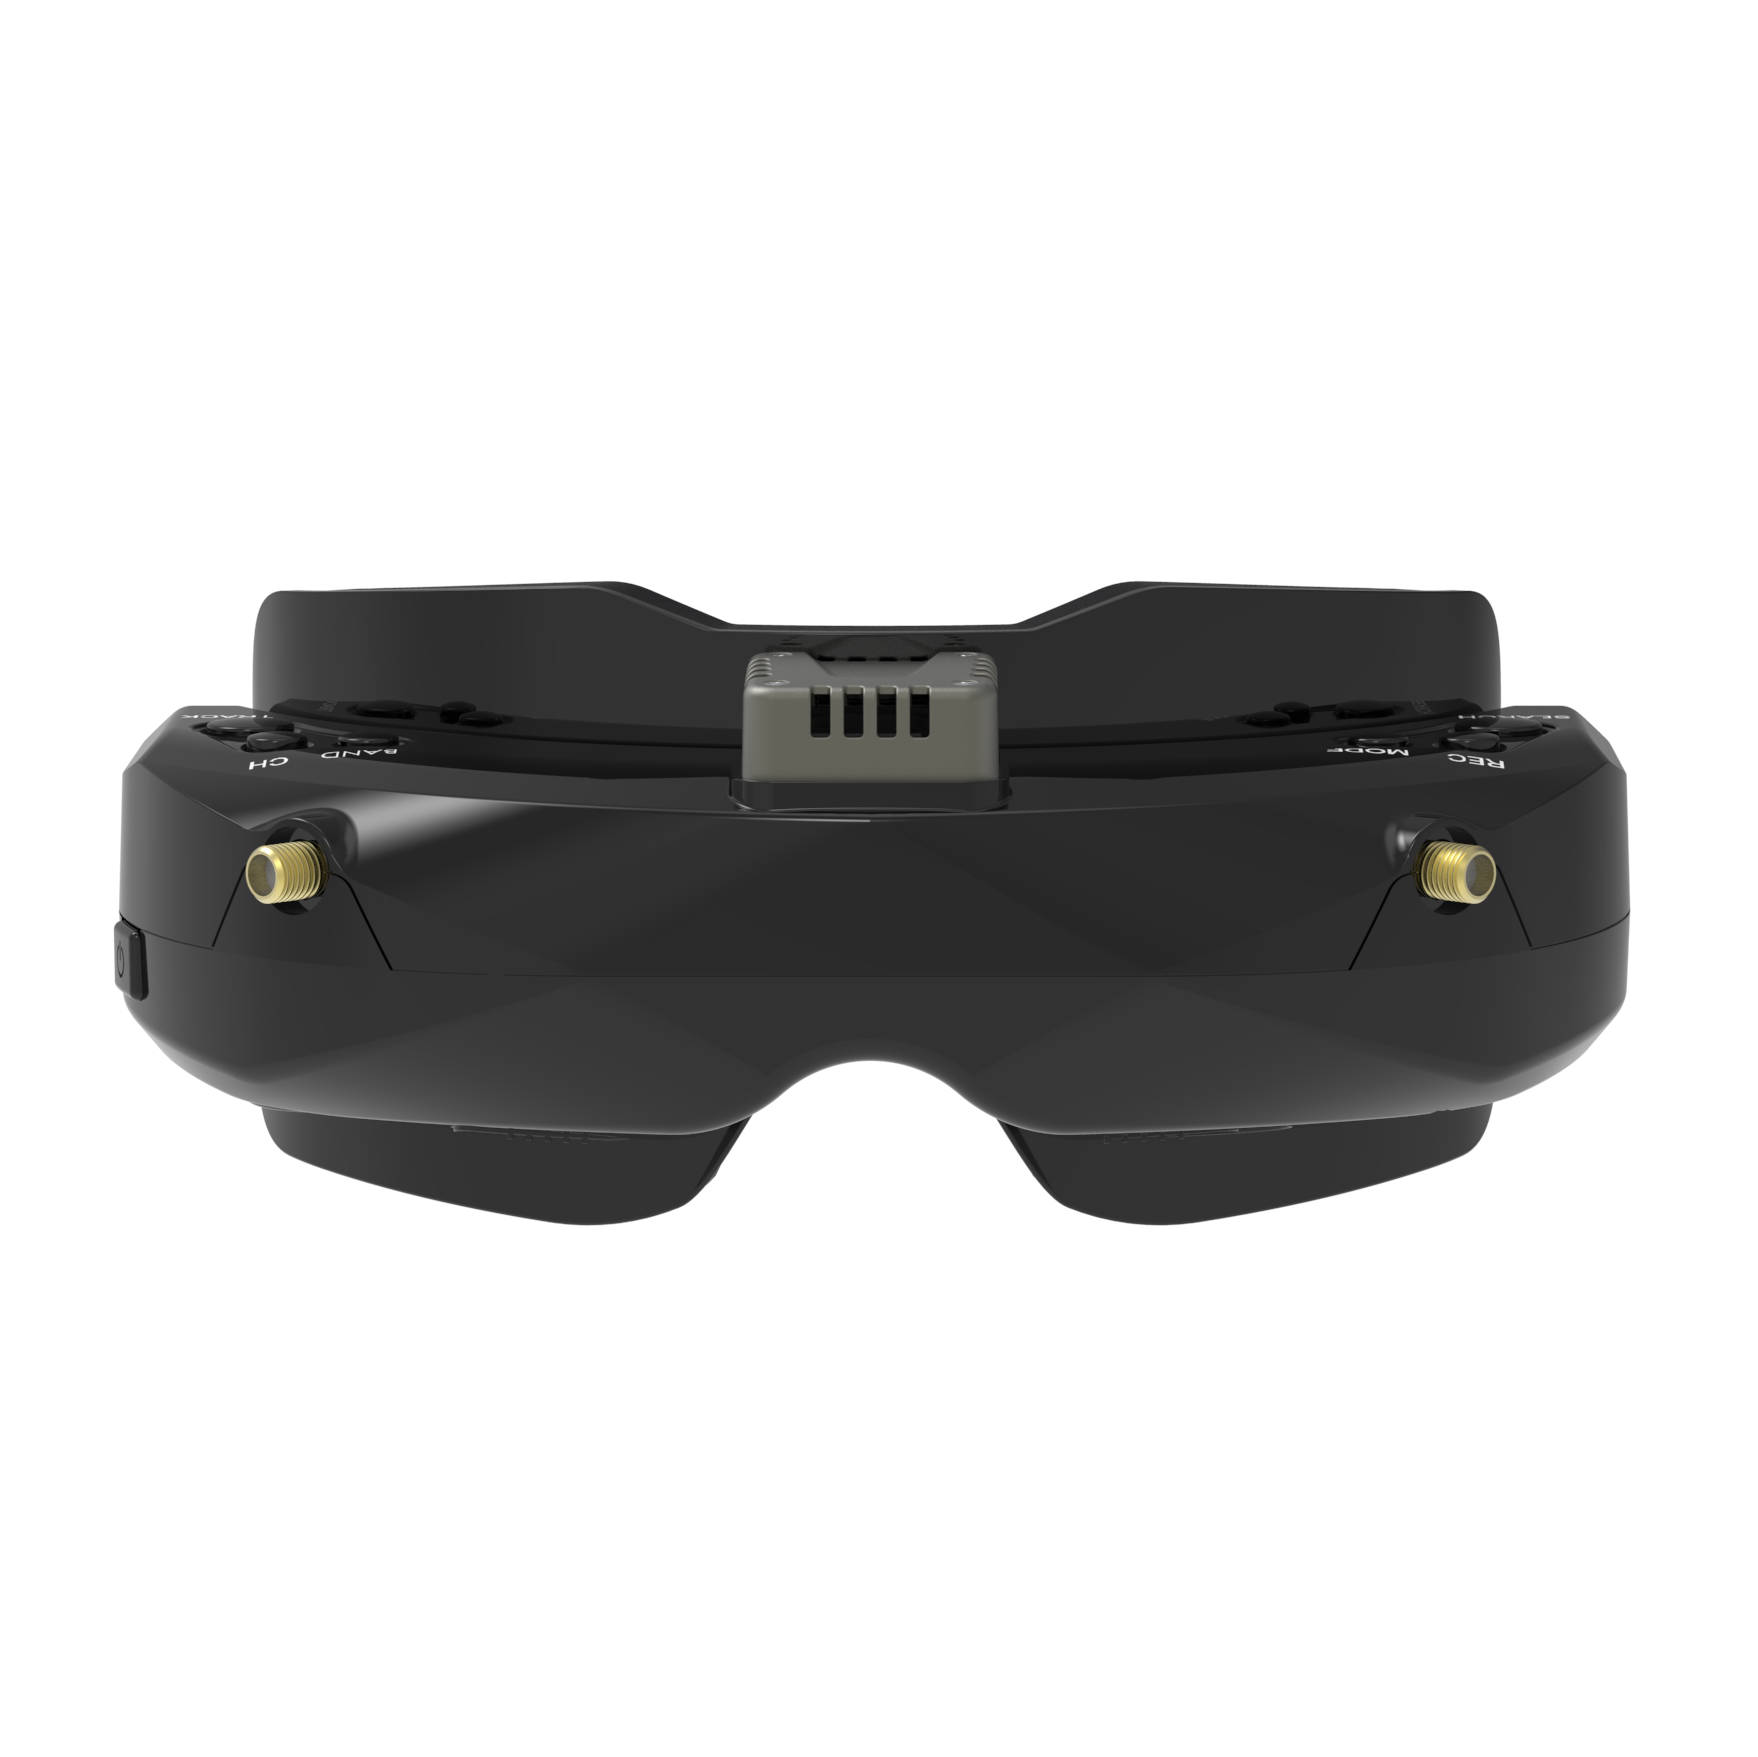 SKYZONE SKY02O FPV Goggles OLED 5.8Ghz SteadyView Diversity RX Built in HeadTracker DVR AVIN/OUT for RC Racing Drone